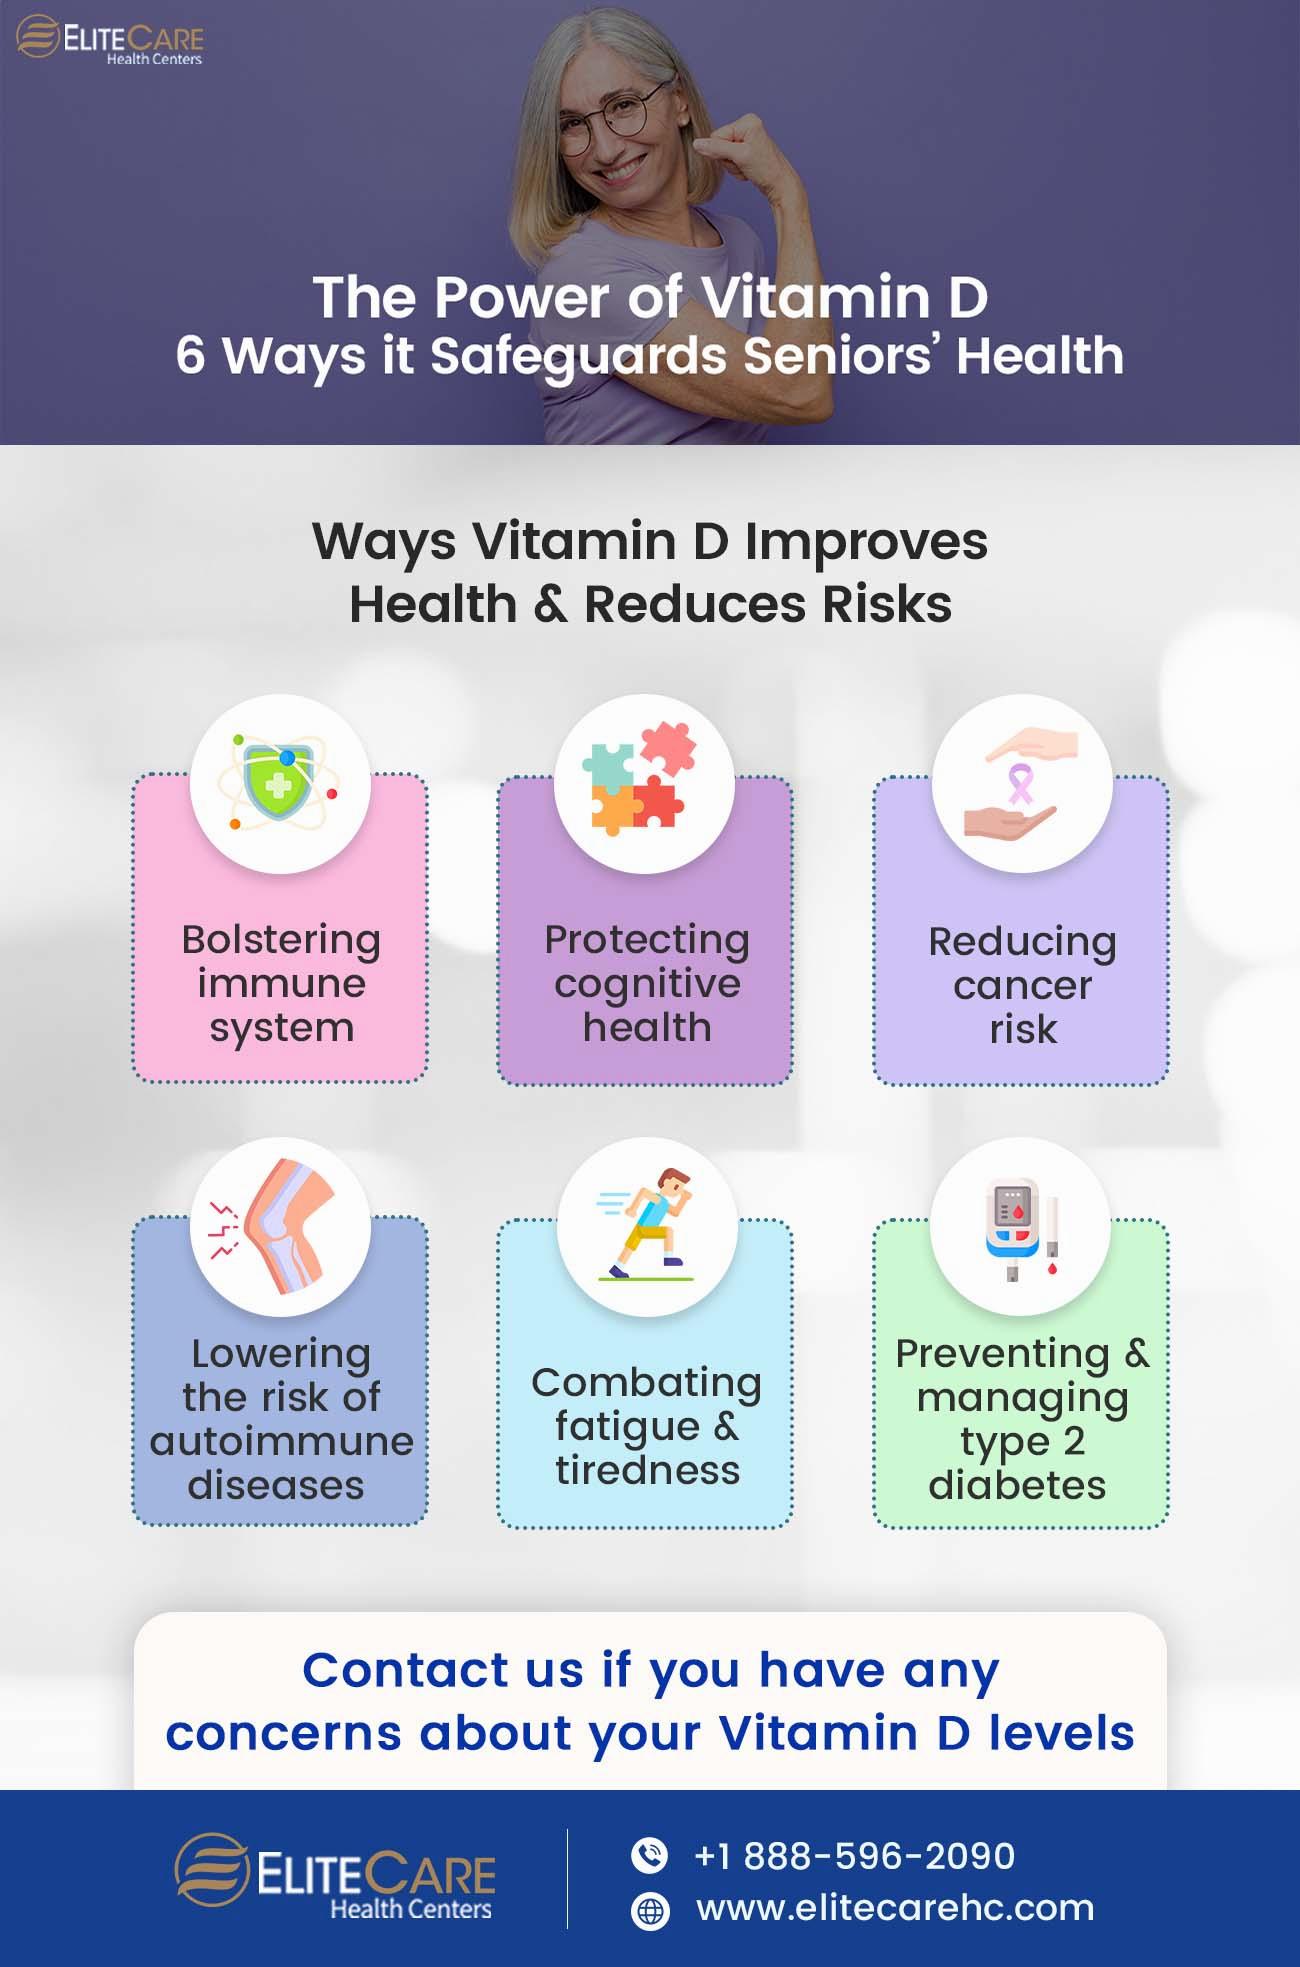 A diagram showing six ways vitamin D improves health and reduces risks for seniors.